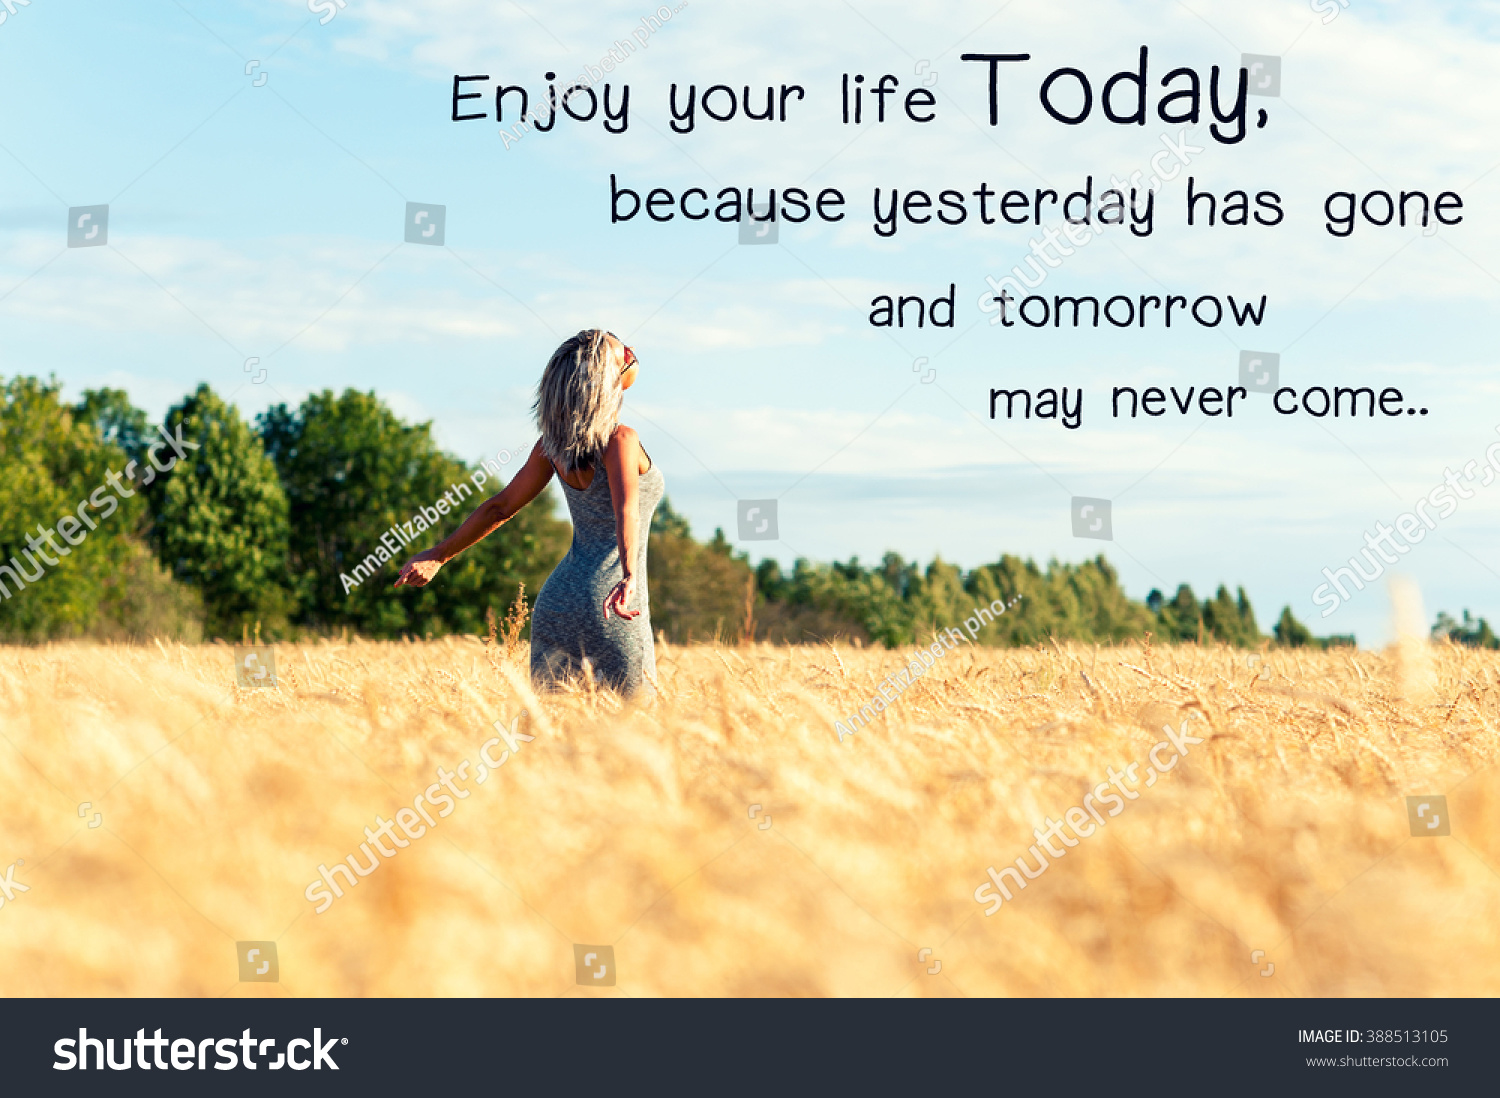 Enjoy your life today because yesterday has gone and tomorrow may never e Inspirational motivating